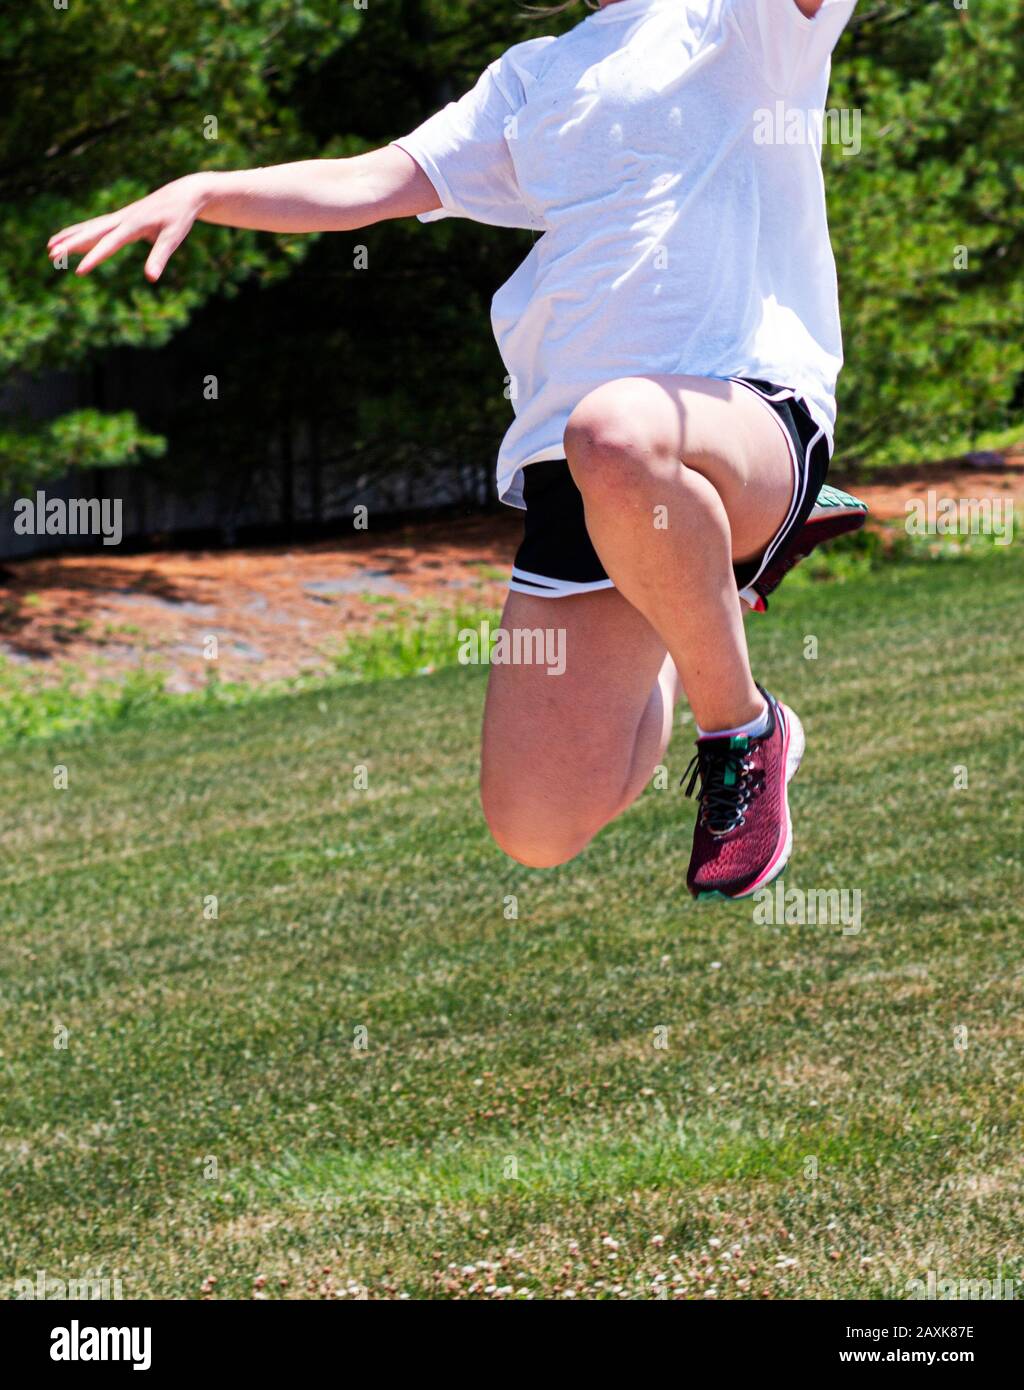 A high school girl is jumping high in the air practicing long and triple jump during track and field practice. Stock Photo